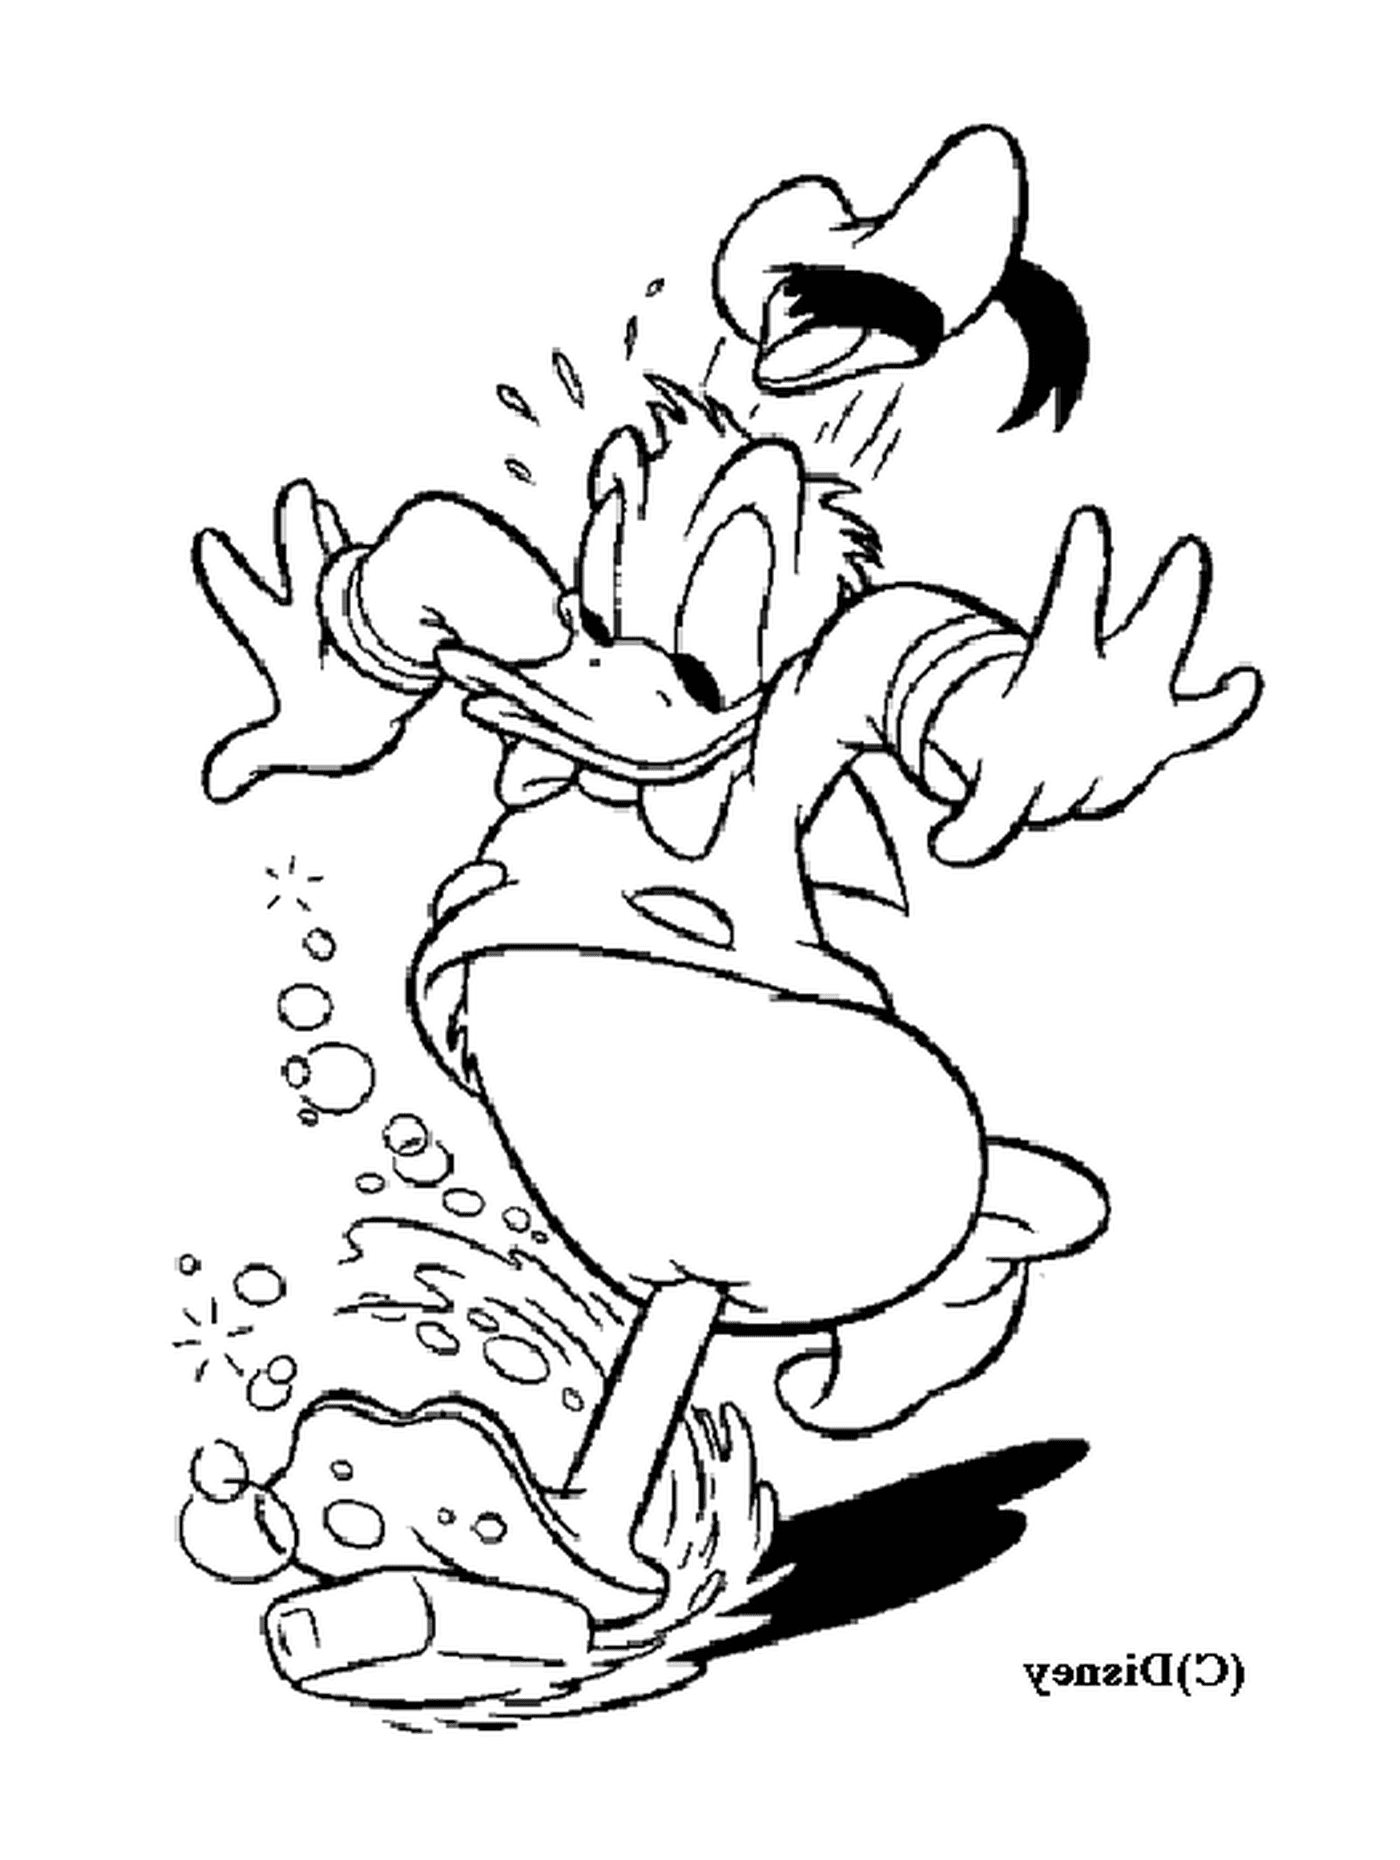  Donald slides on a soap, at his own risk 